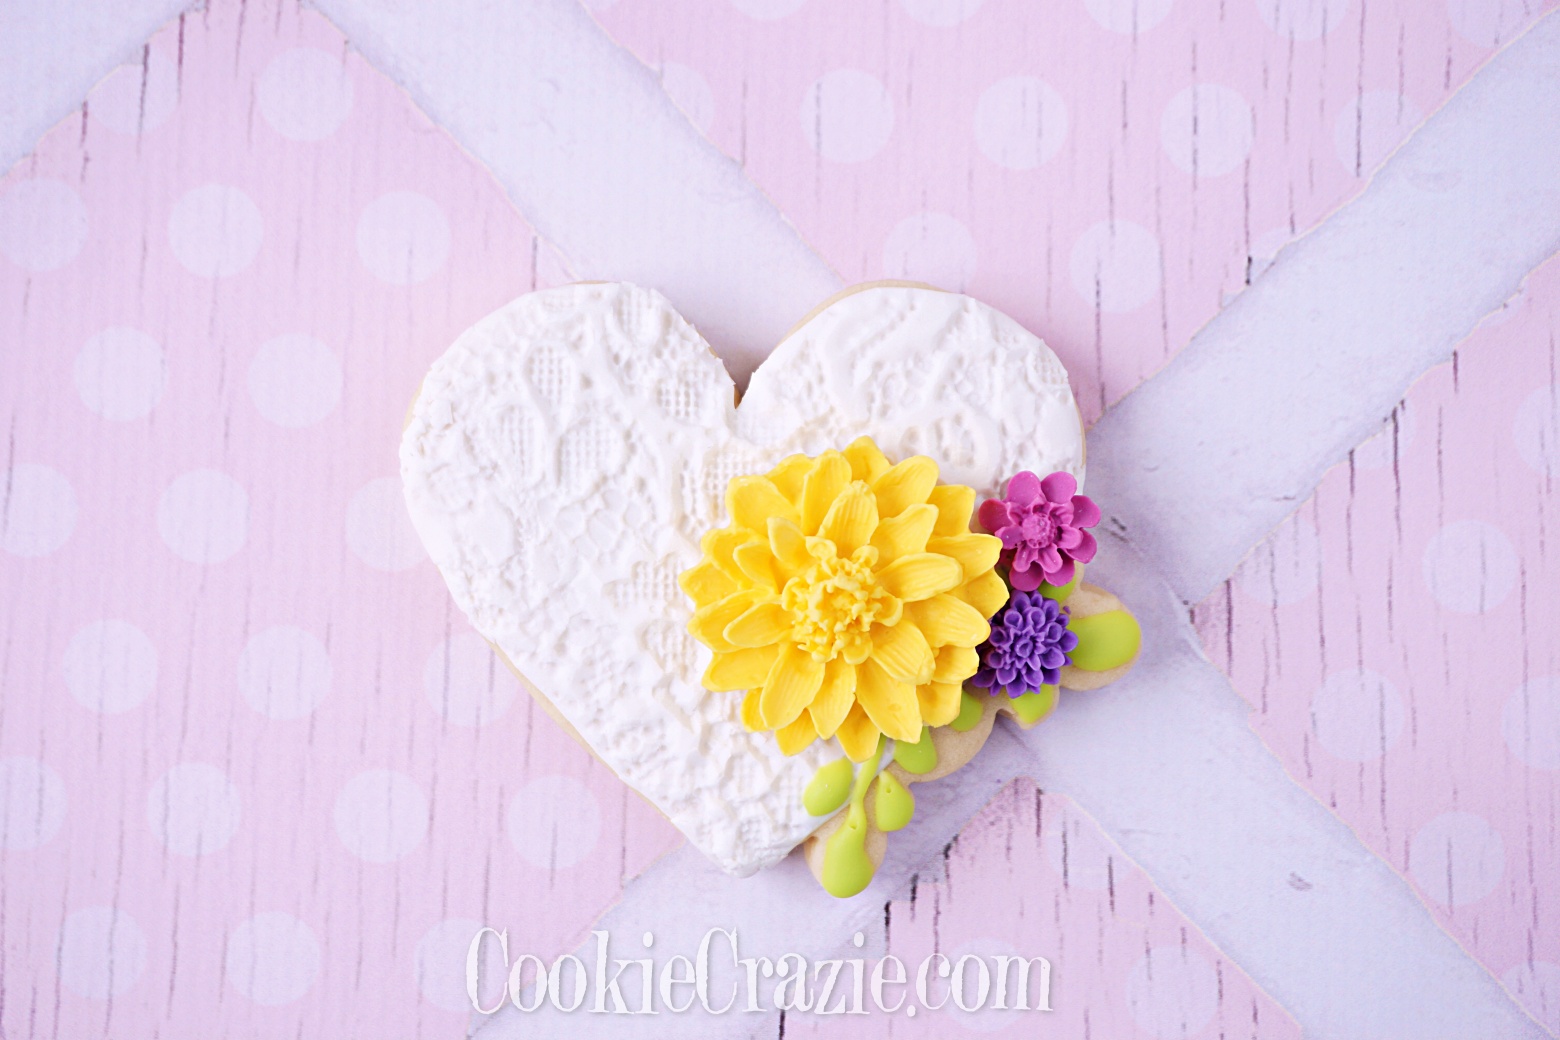  Floral Heart Decorated Sugar Cookie YouTube video  HERE  